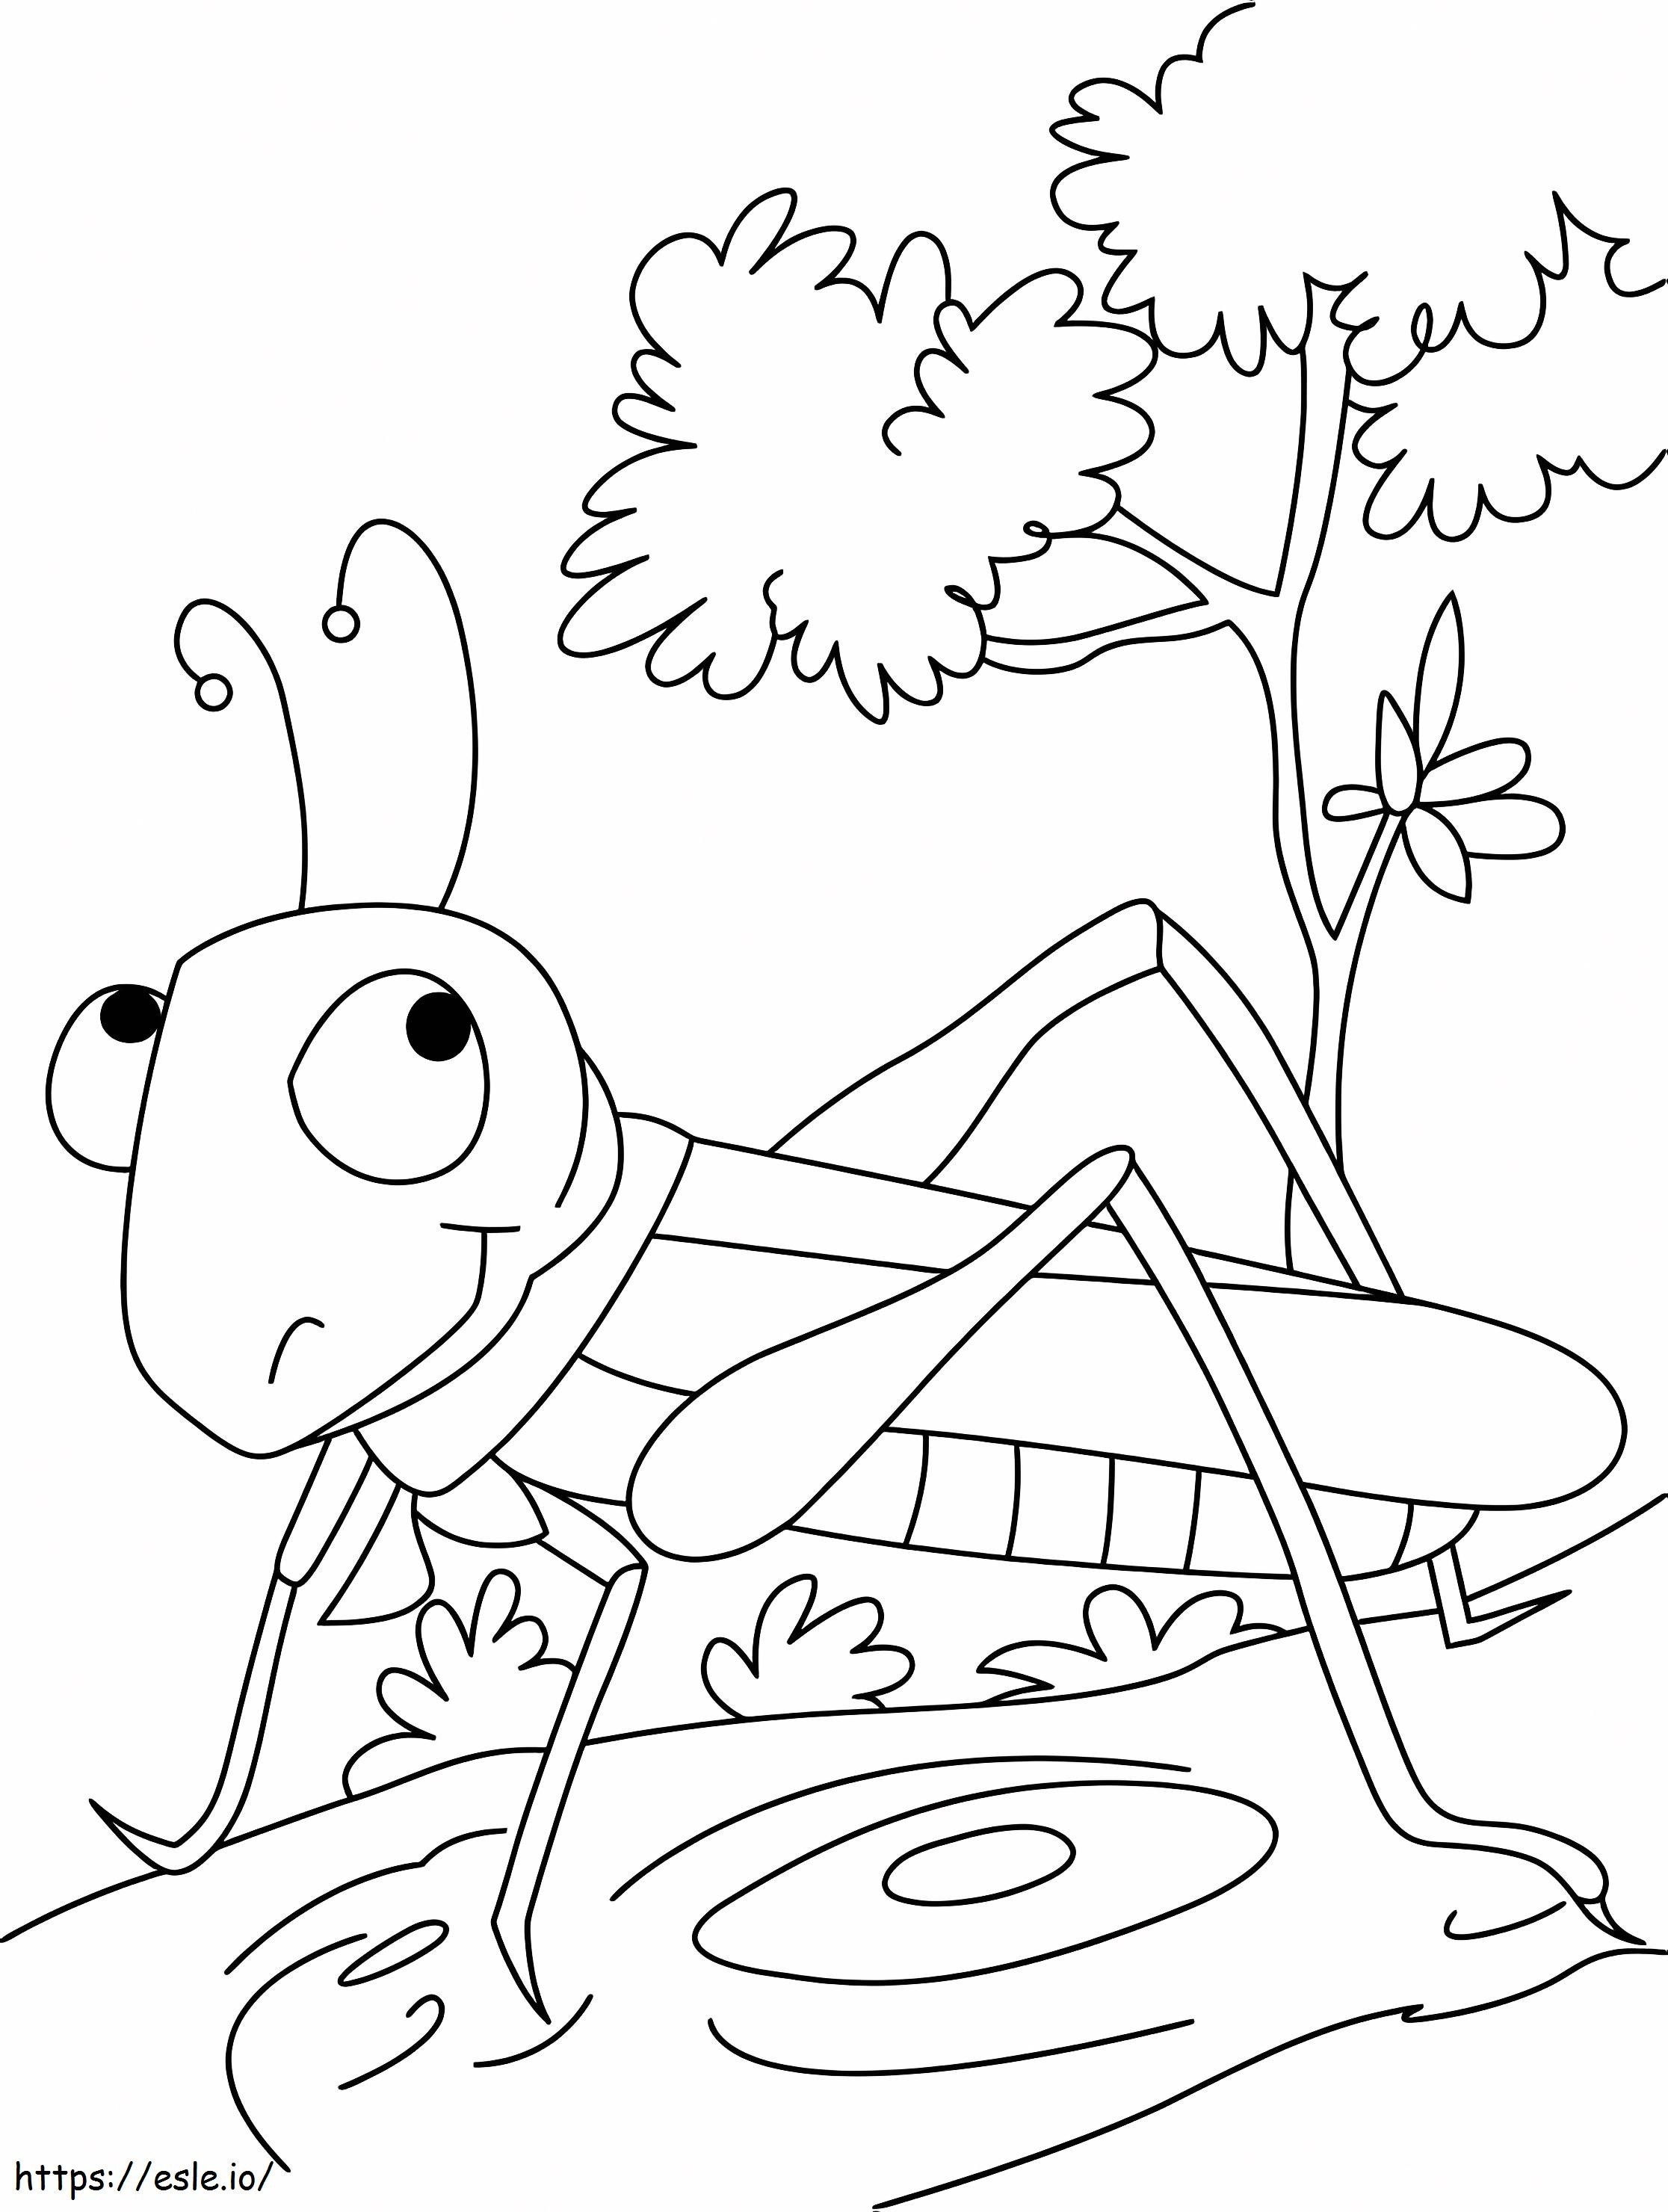 The Grasshopper Showstopper coloring page